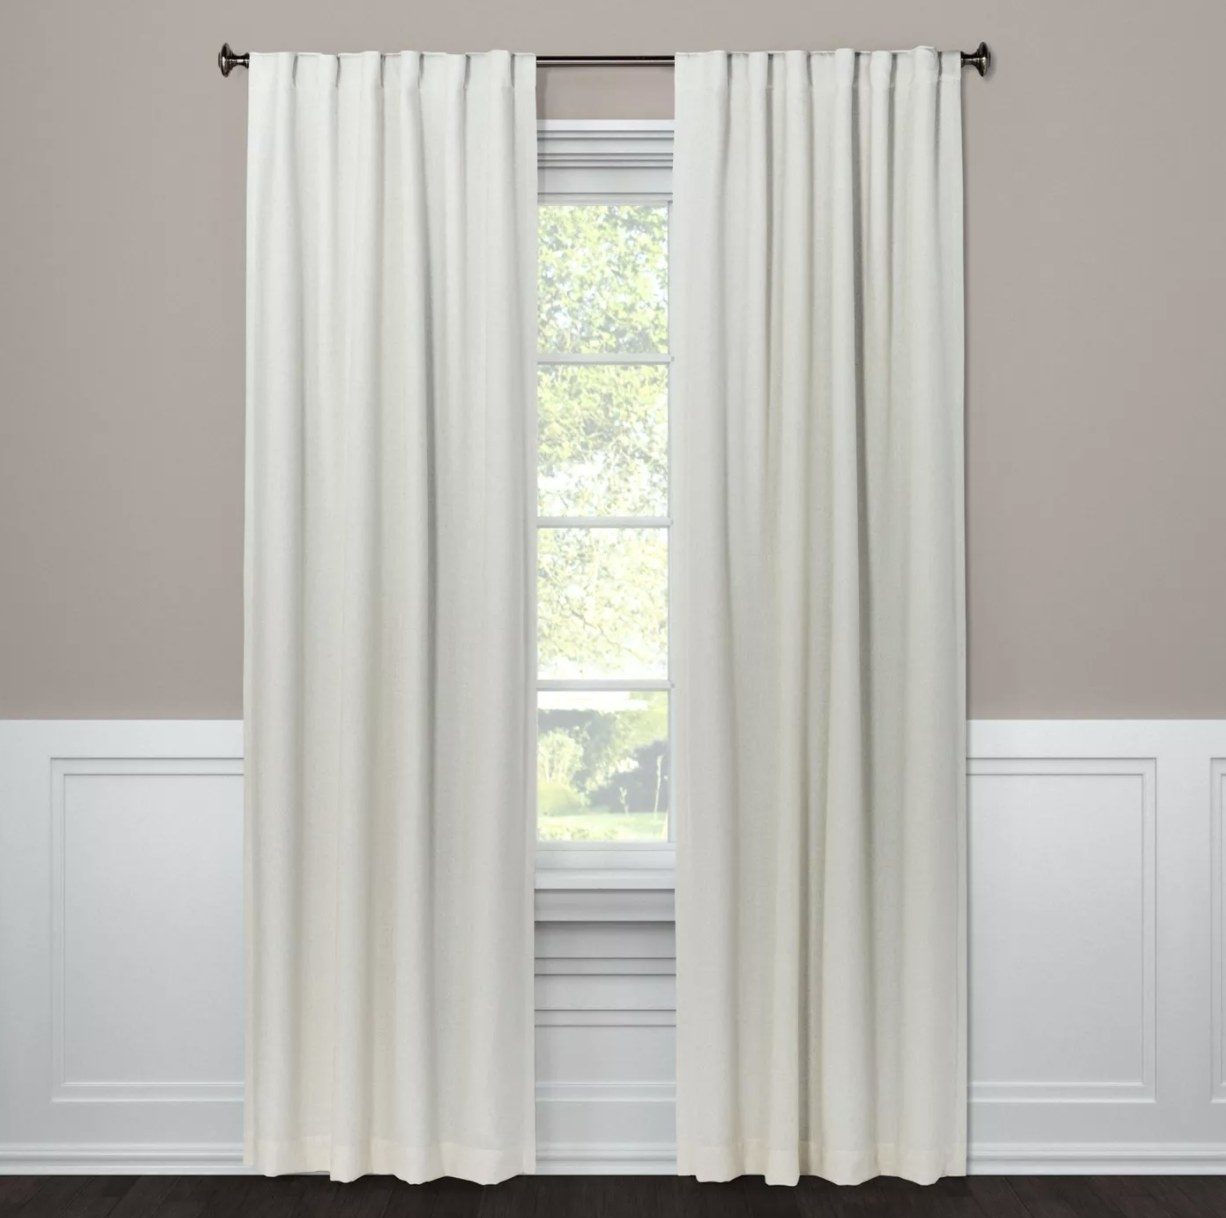 Blackout curtains hung over window